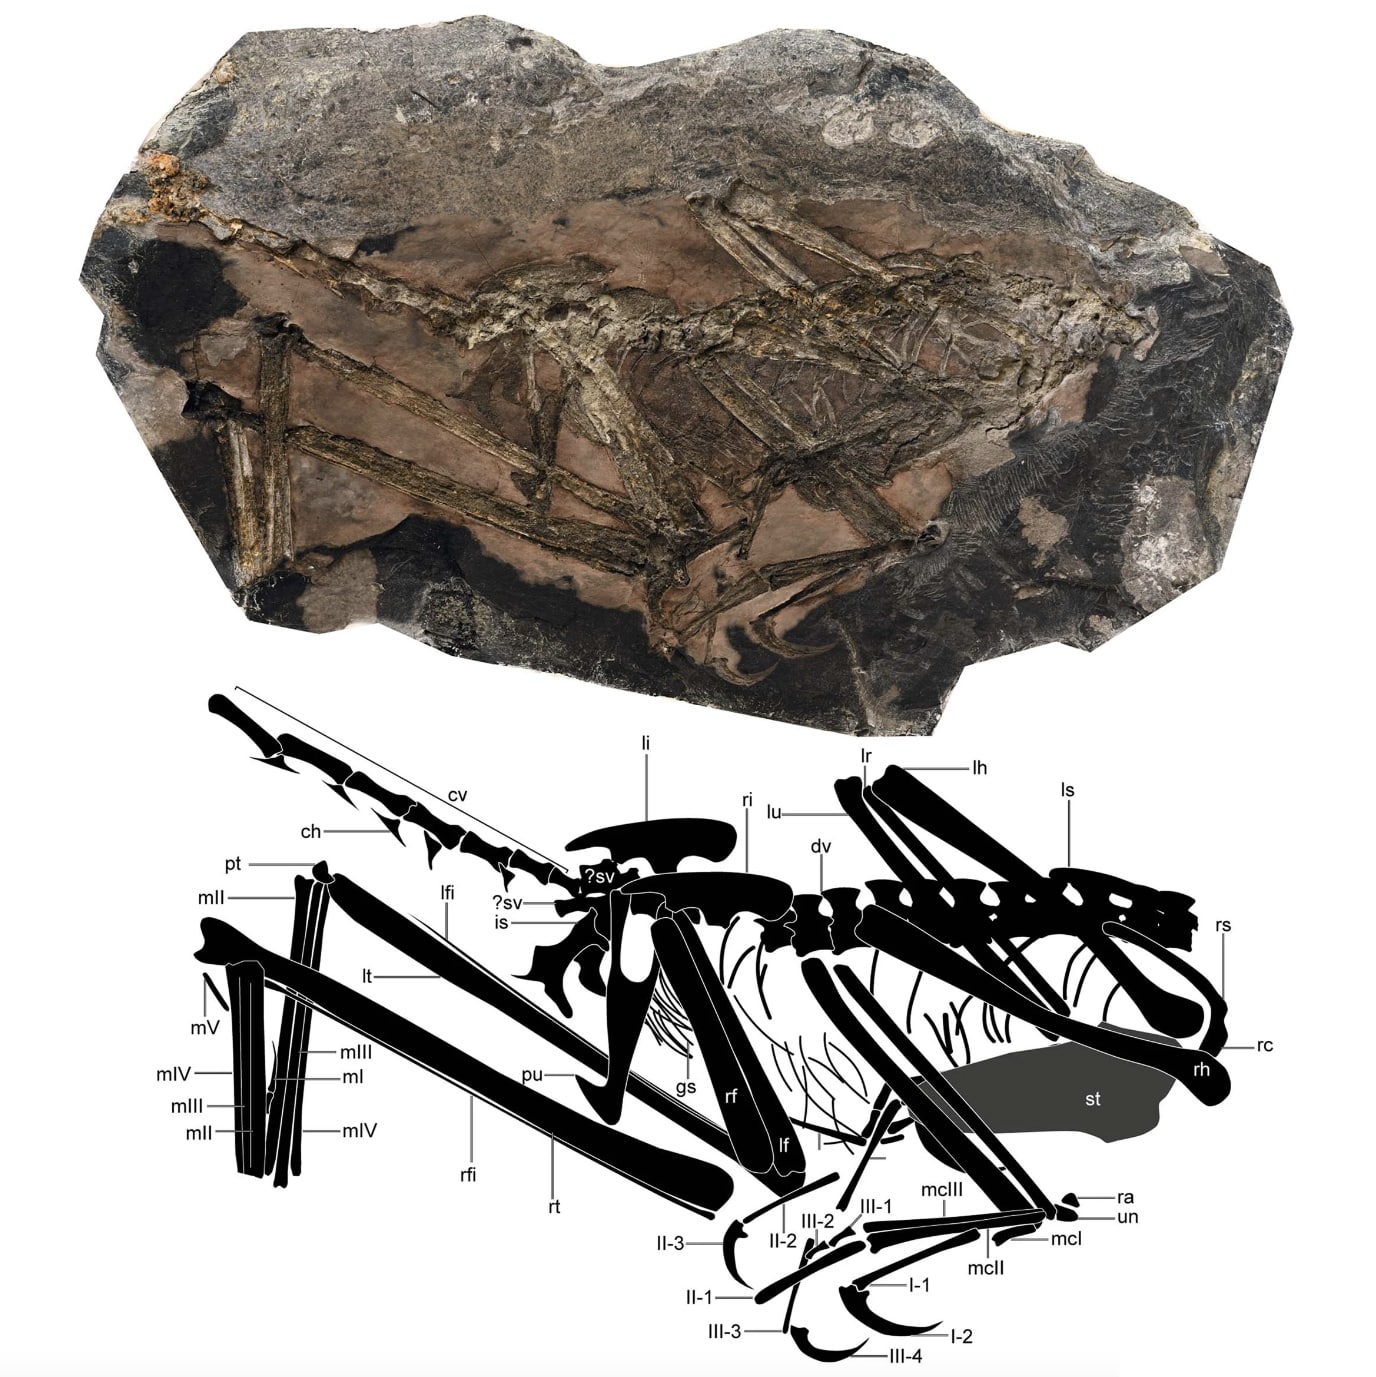 Paleontologists Discover Leggy Jurassic Dinosaur Fossil Connected to Modern Birds